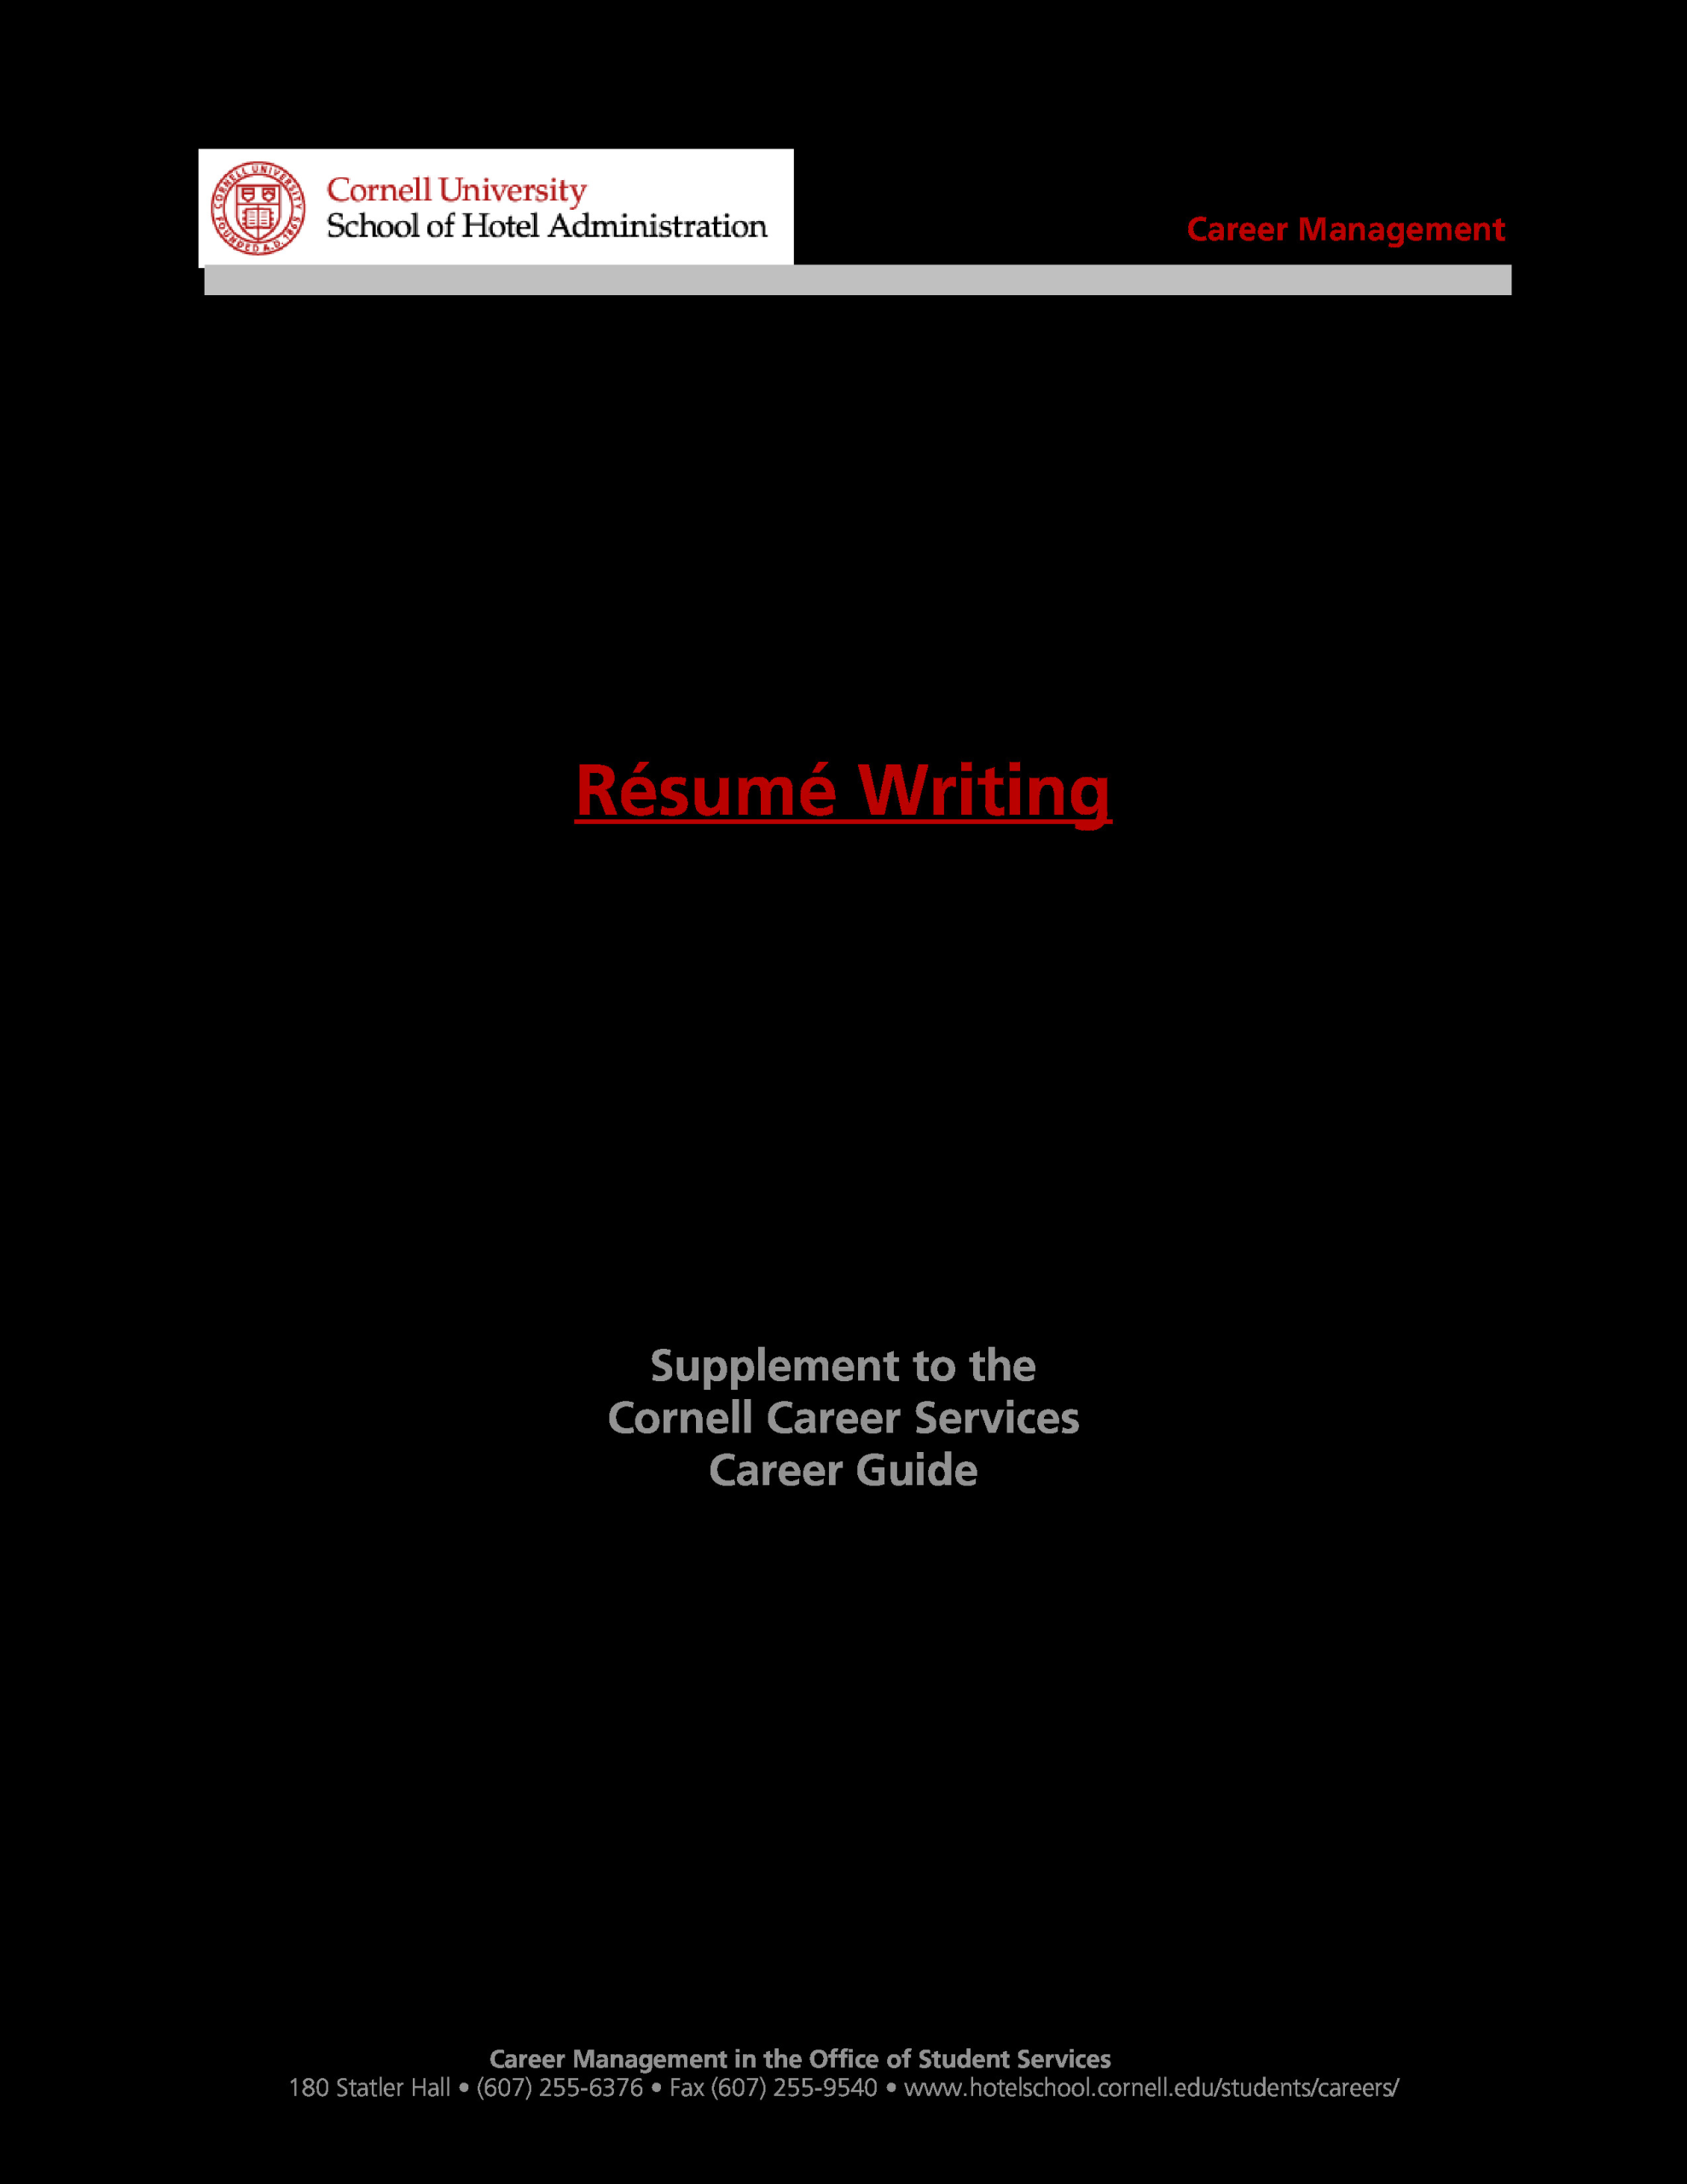 Real Estate Office Manager Resume Sample Real Estate Fice Manager Resume